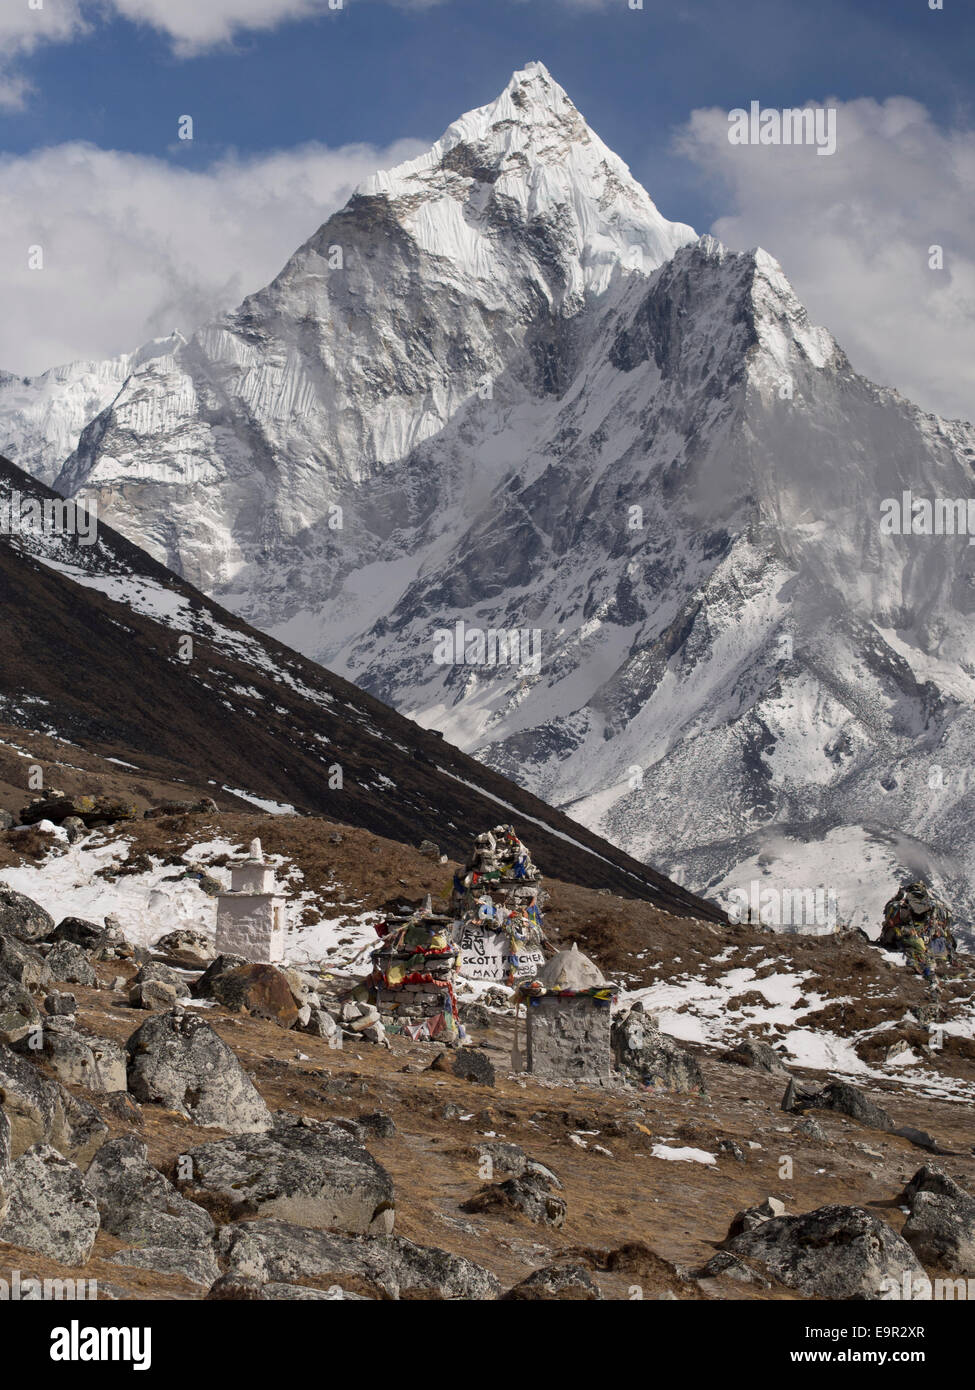 Mount Ama Dablam and memorial cairn to expedition leader Scott Fischer, who died in the 1996 Everest disaster, Everest Region, Nepal. Stock Photo